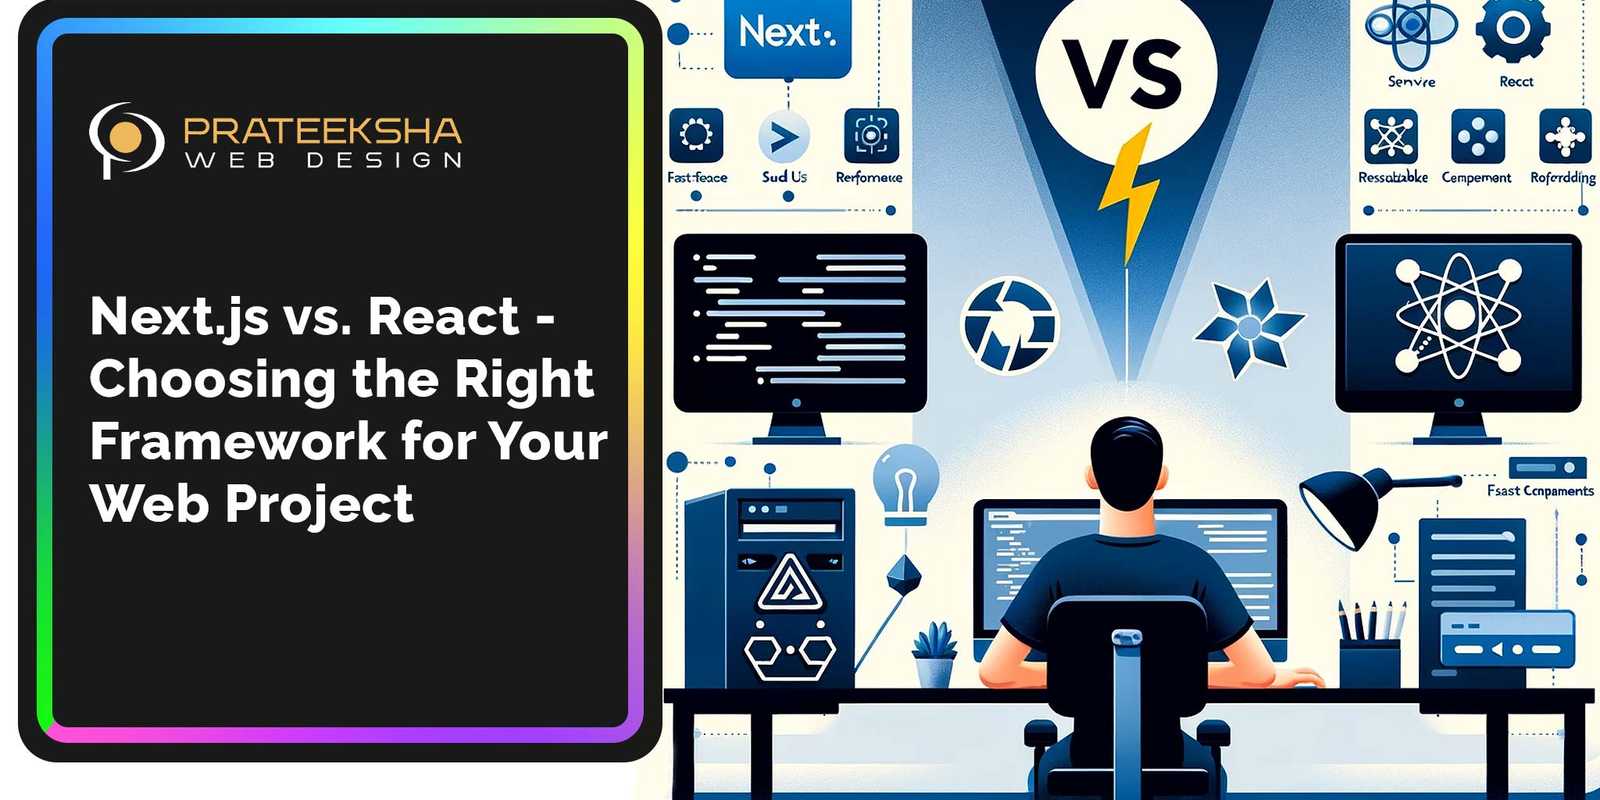 Next.js vs. React - Choosing the Right Framework for Your Web Project